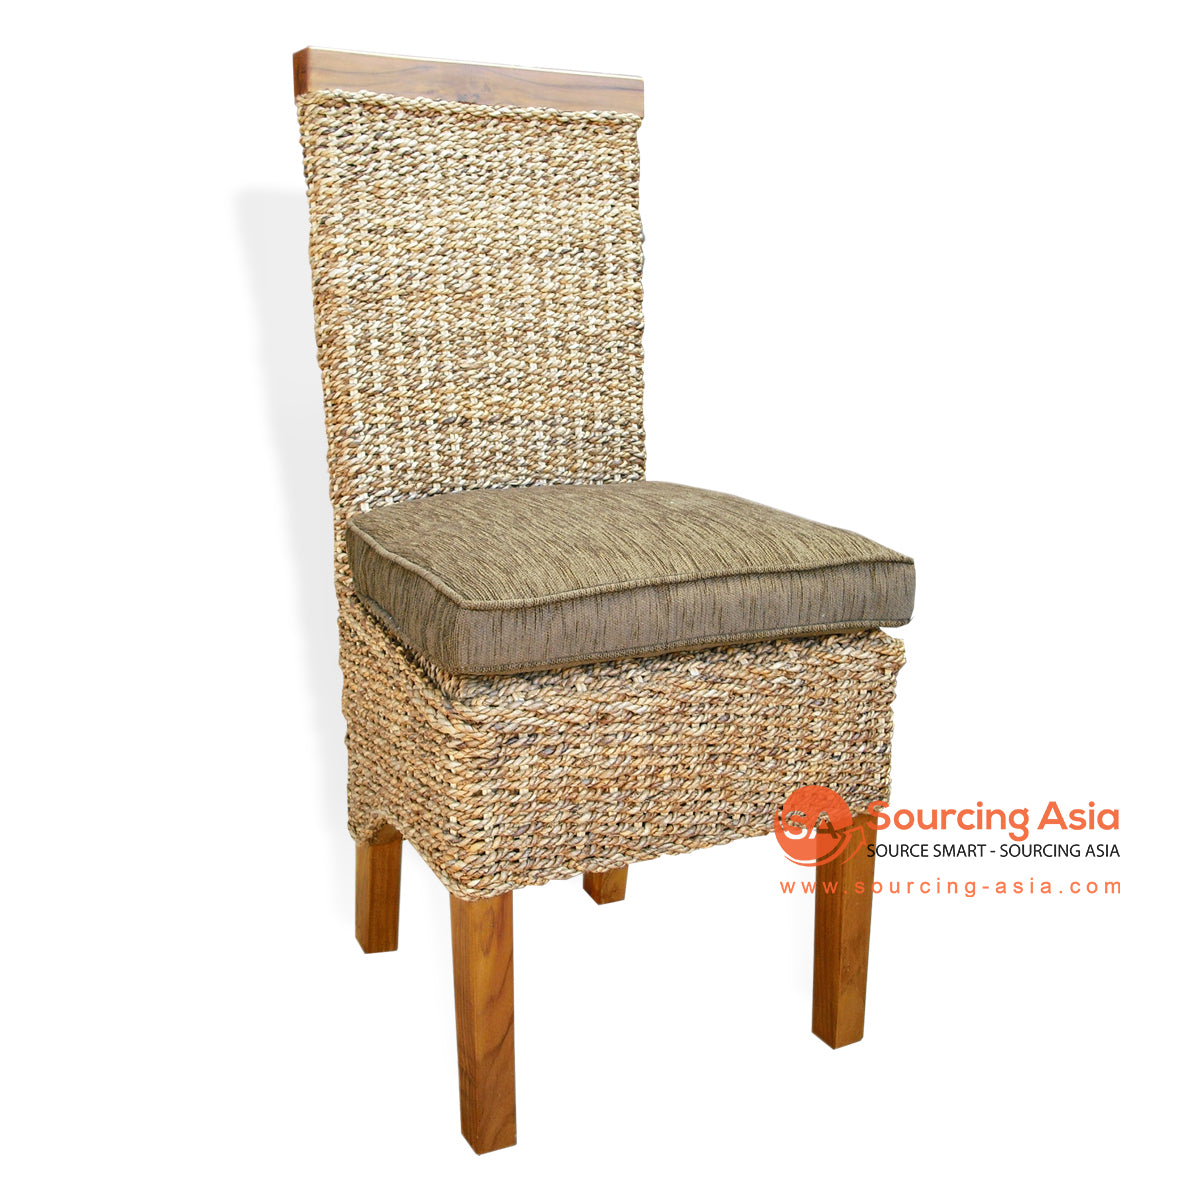 IMAL120 BANANA FIBER DINING CHAIR WITH WOODEN TOP